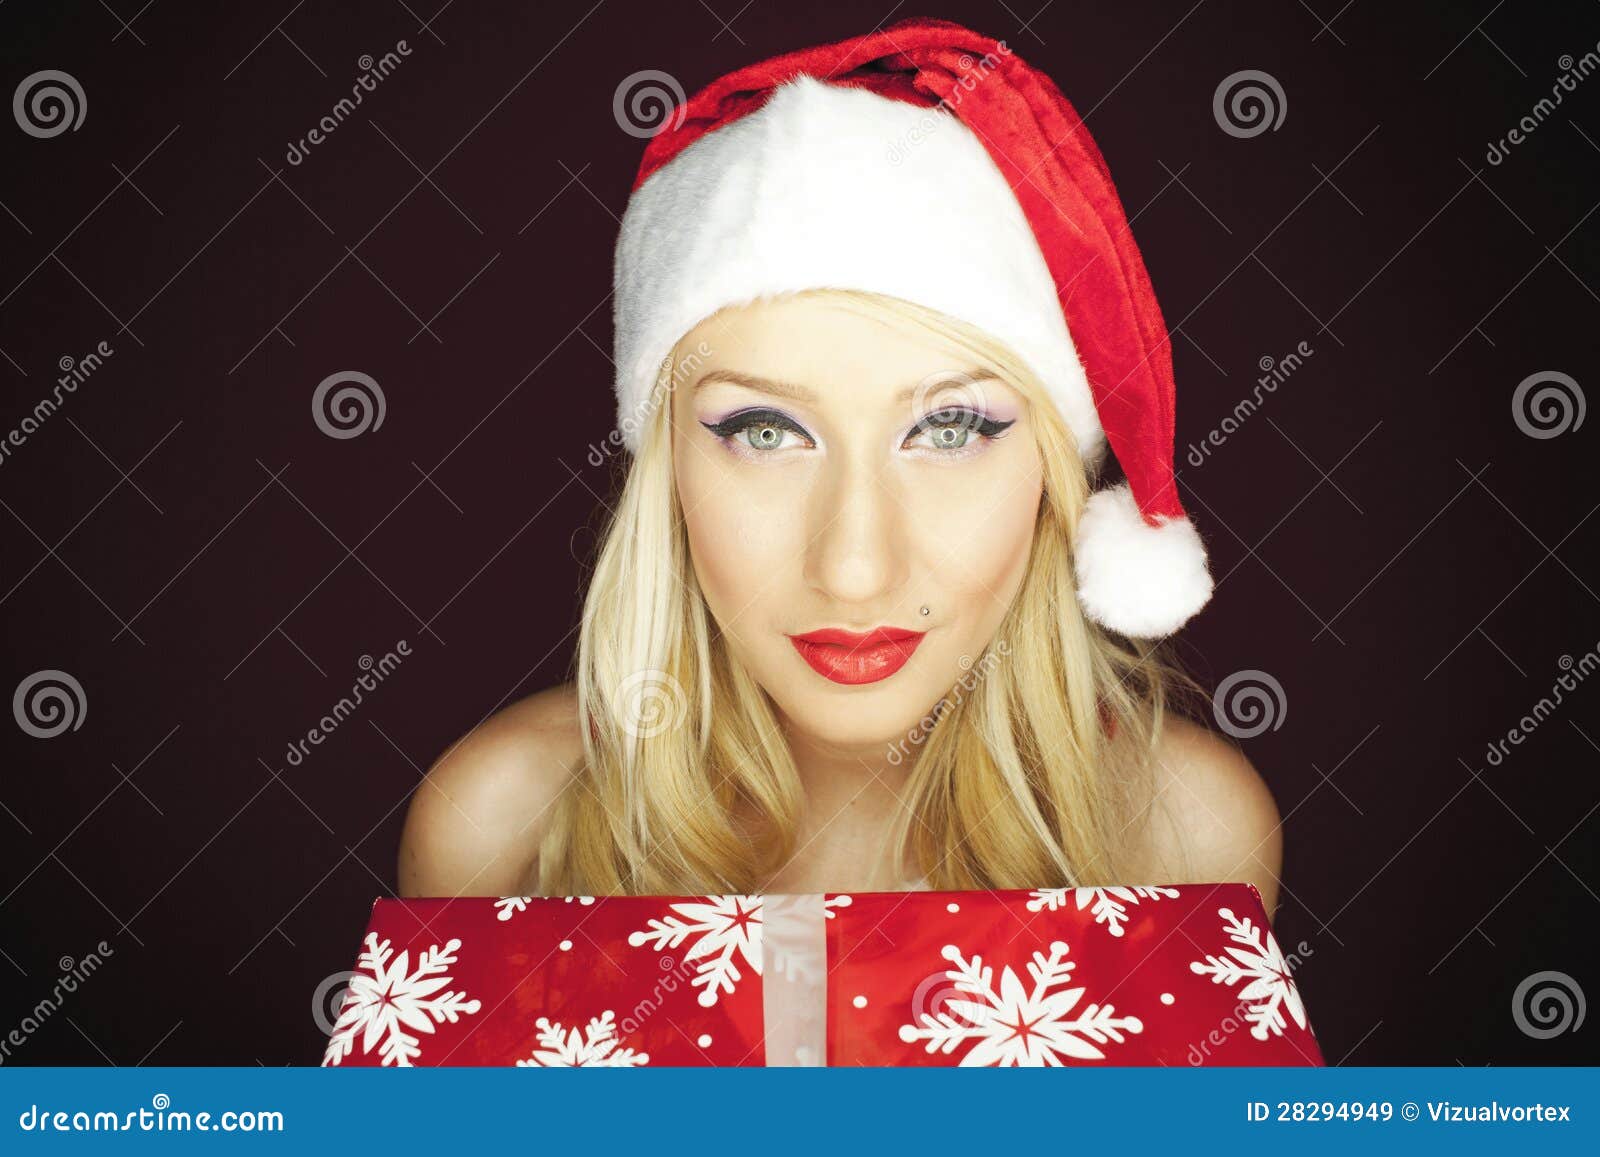 Blonde Christmas Girl With Present Stock Image Image Of Christmas Outfit 28294949